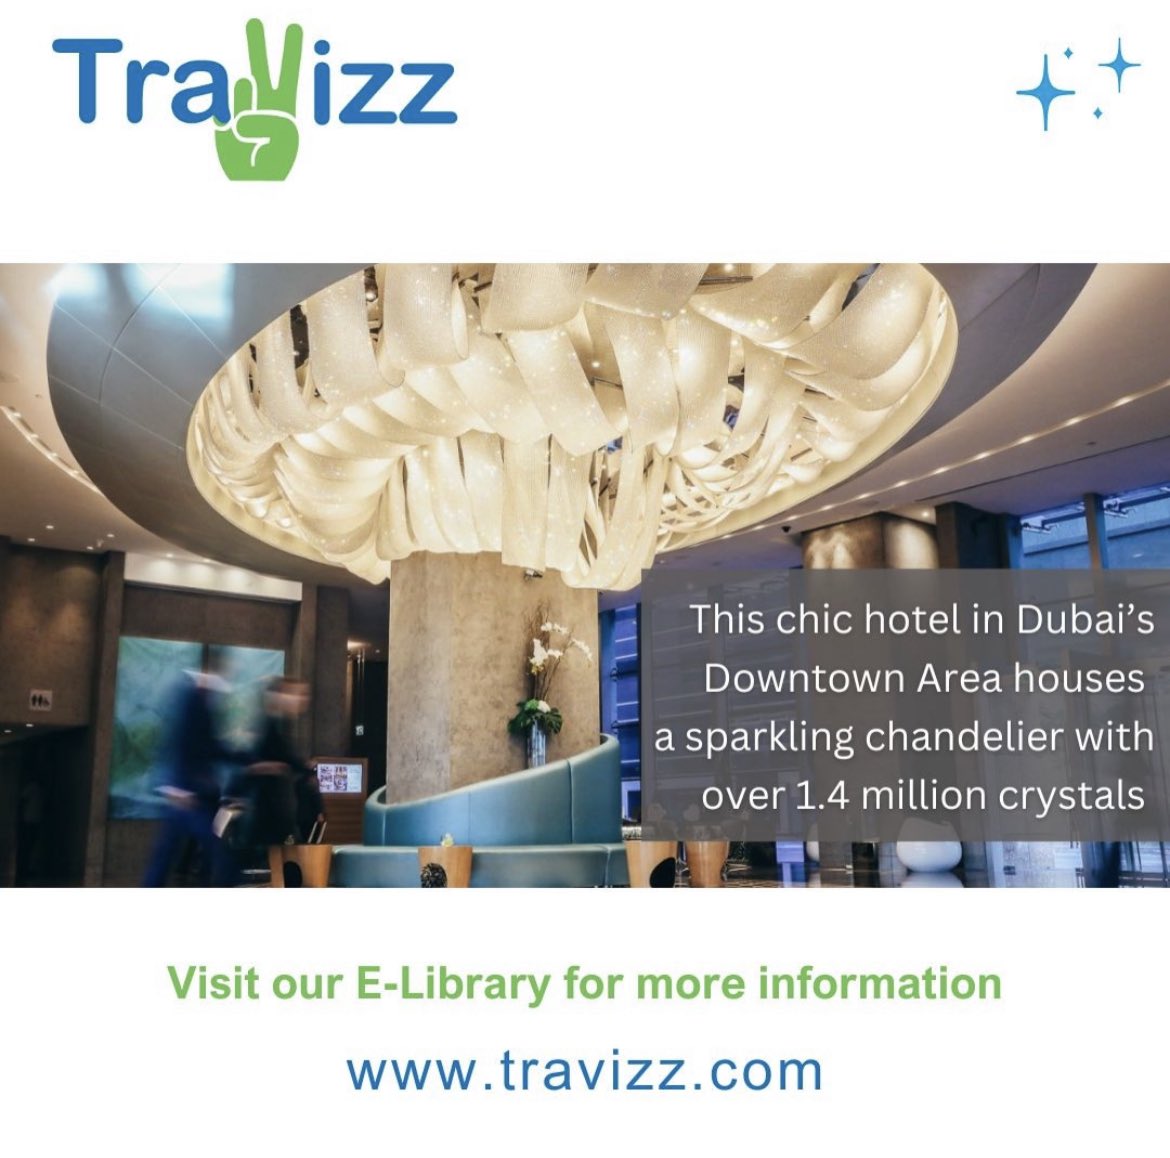 As you enter this iconic hotel in Dubai Downtown, behold this Chandelier with a million crystals

Discover more about this luxurious property at Travizz.com

#dubaihotels #leisuretravel #visitdubai #dubai  #travelexpert #travelconsultant #travelagent #AUSvIND #INDvAUS